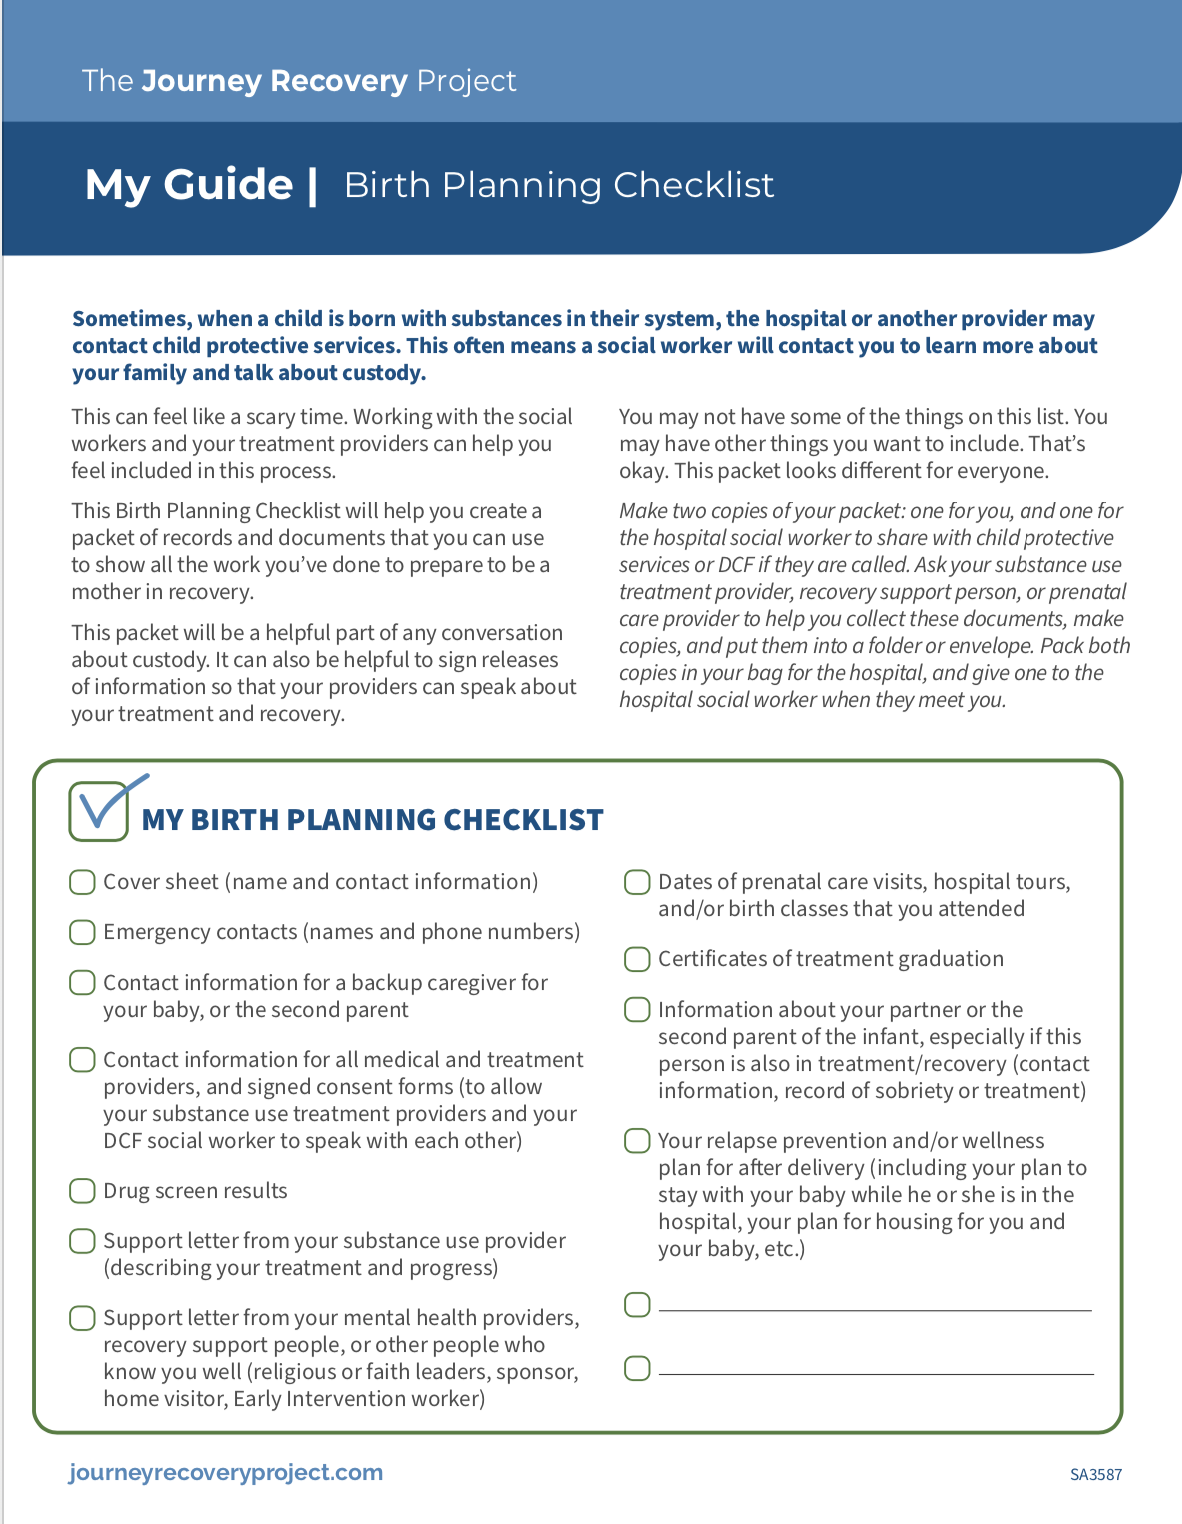 New Baby Checklist: Everything You Need Before Baby Arrives - New Parents